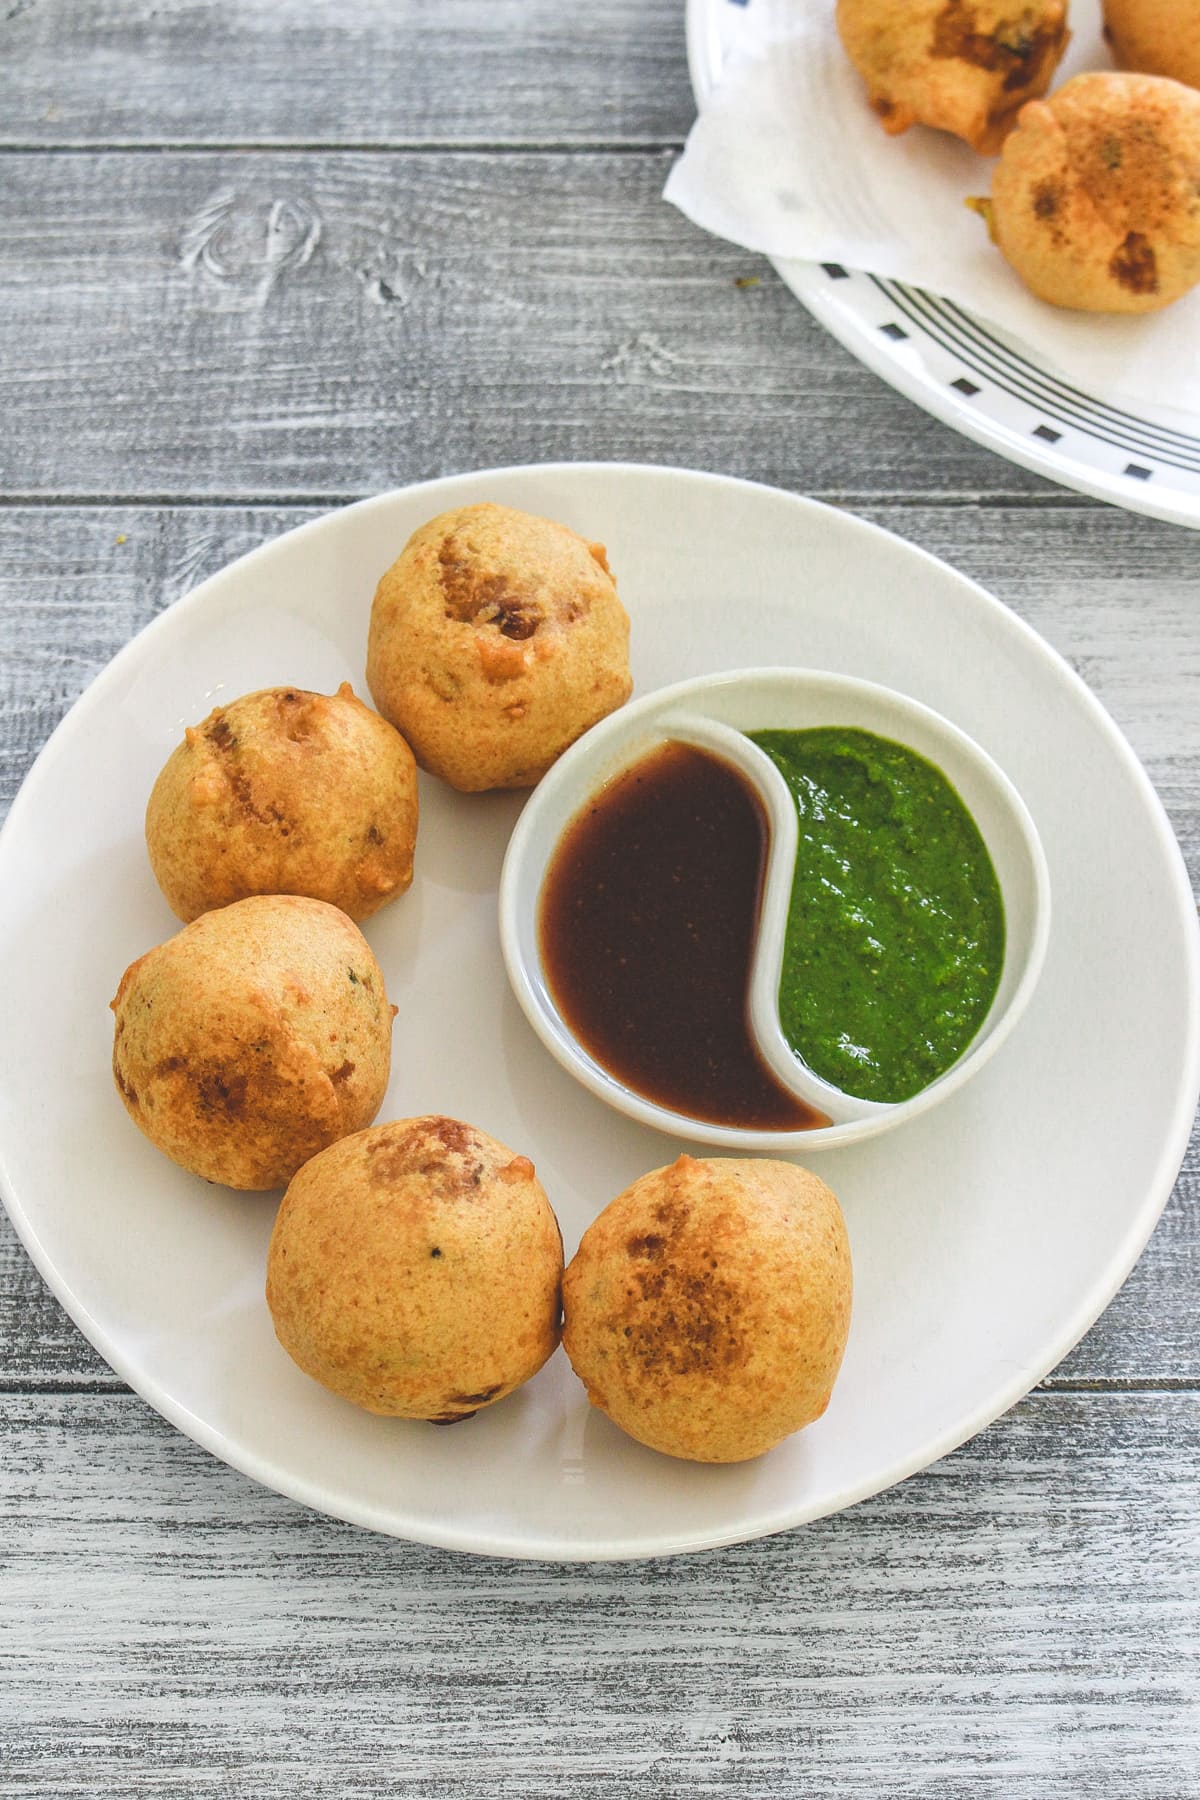 Batata vada in a plate with green chuney and tamarind date chutney.